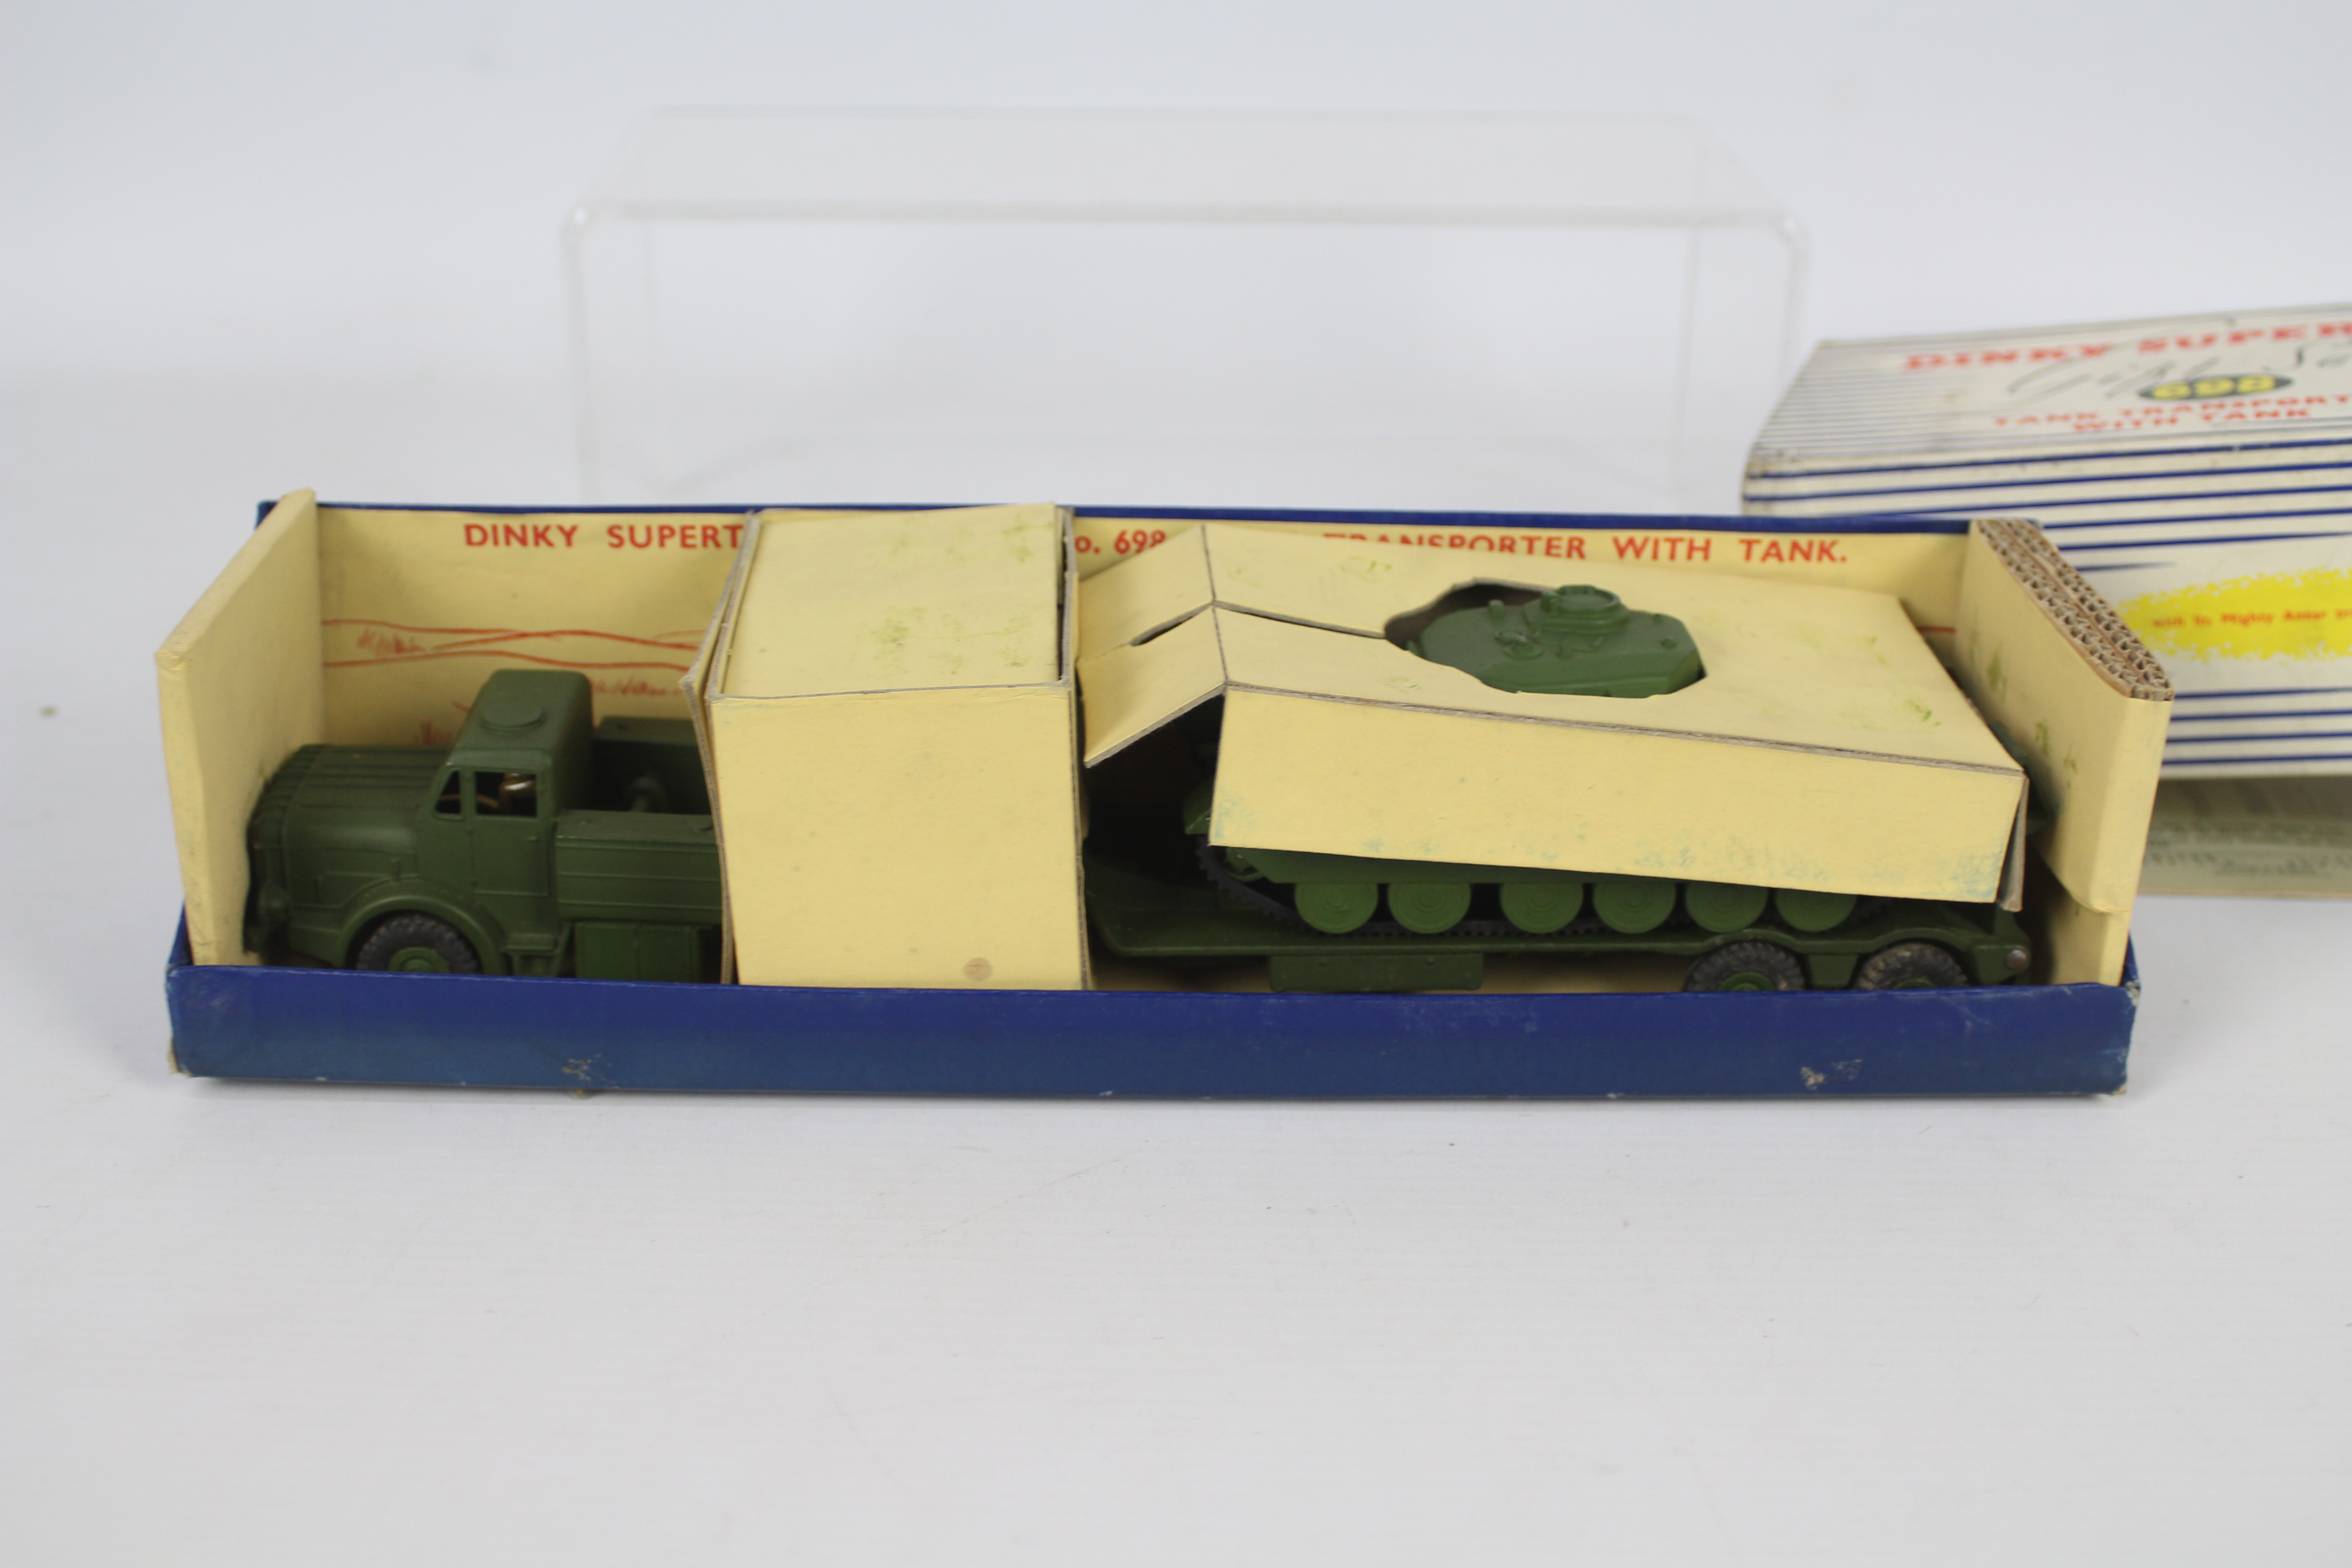 Dinky - A boxed Dinky # 698 Mighty Antar Tank Transporter with Centurion Tank. - Image 8 of 8